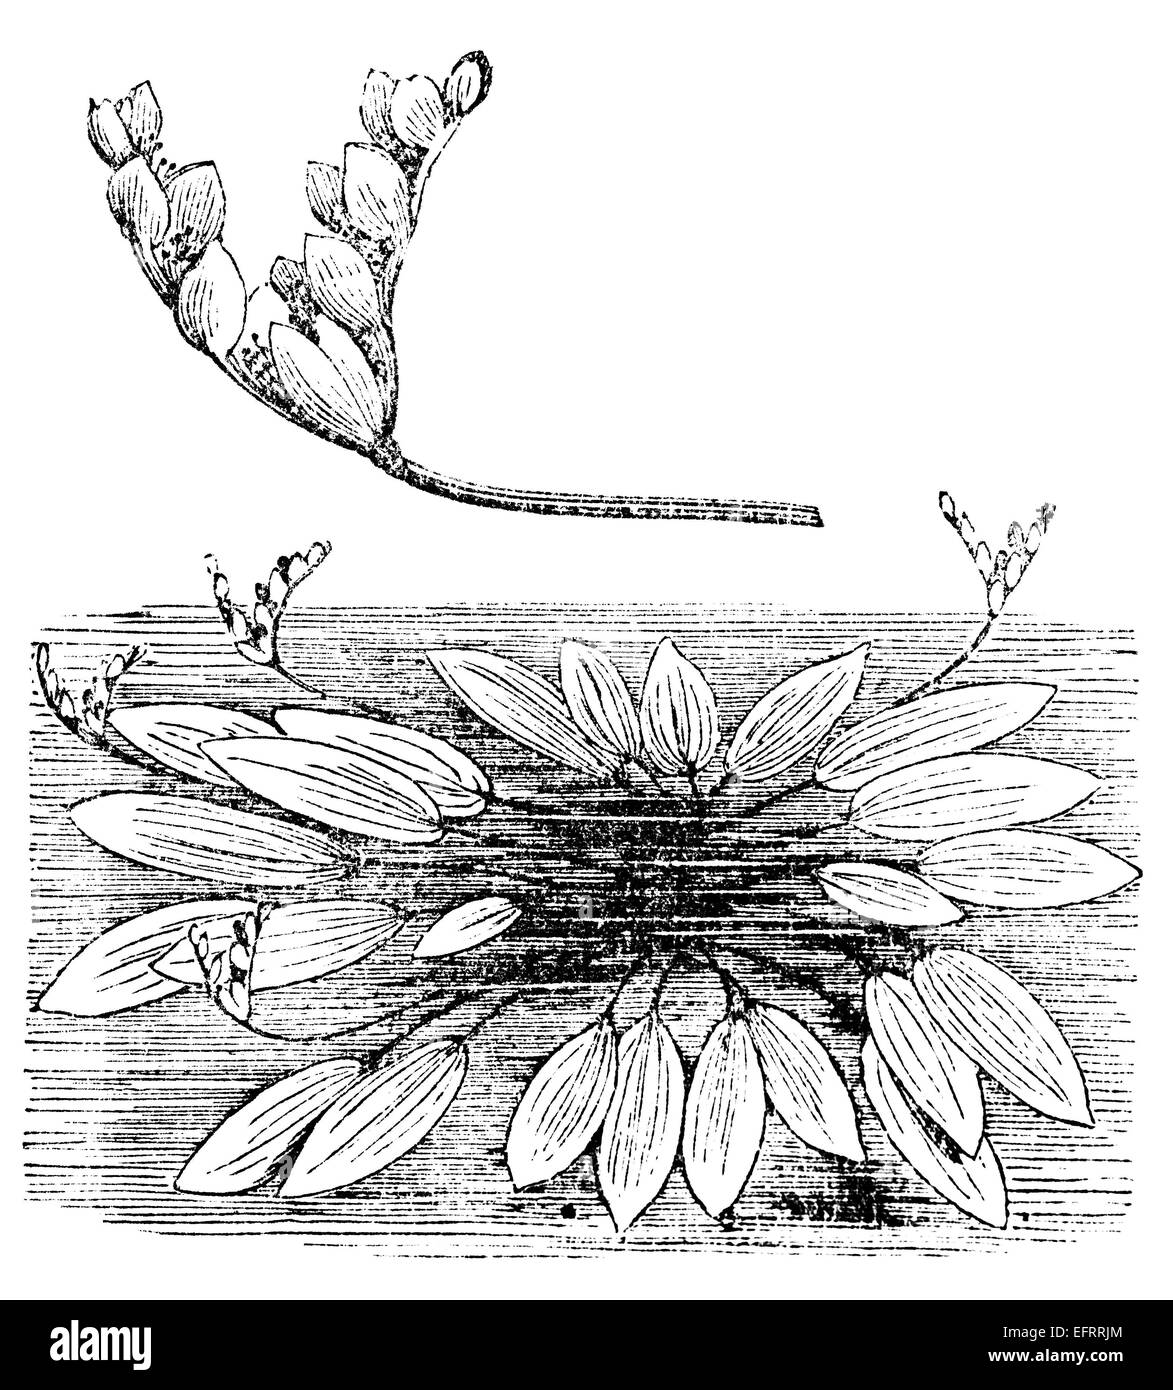 Victorian engraving of a Cape pond weed, or aponogeton. Digitally restored image from a mid-19th century Encyclopaedia. Stock Photo